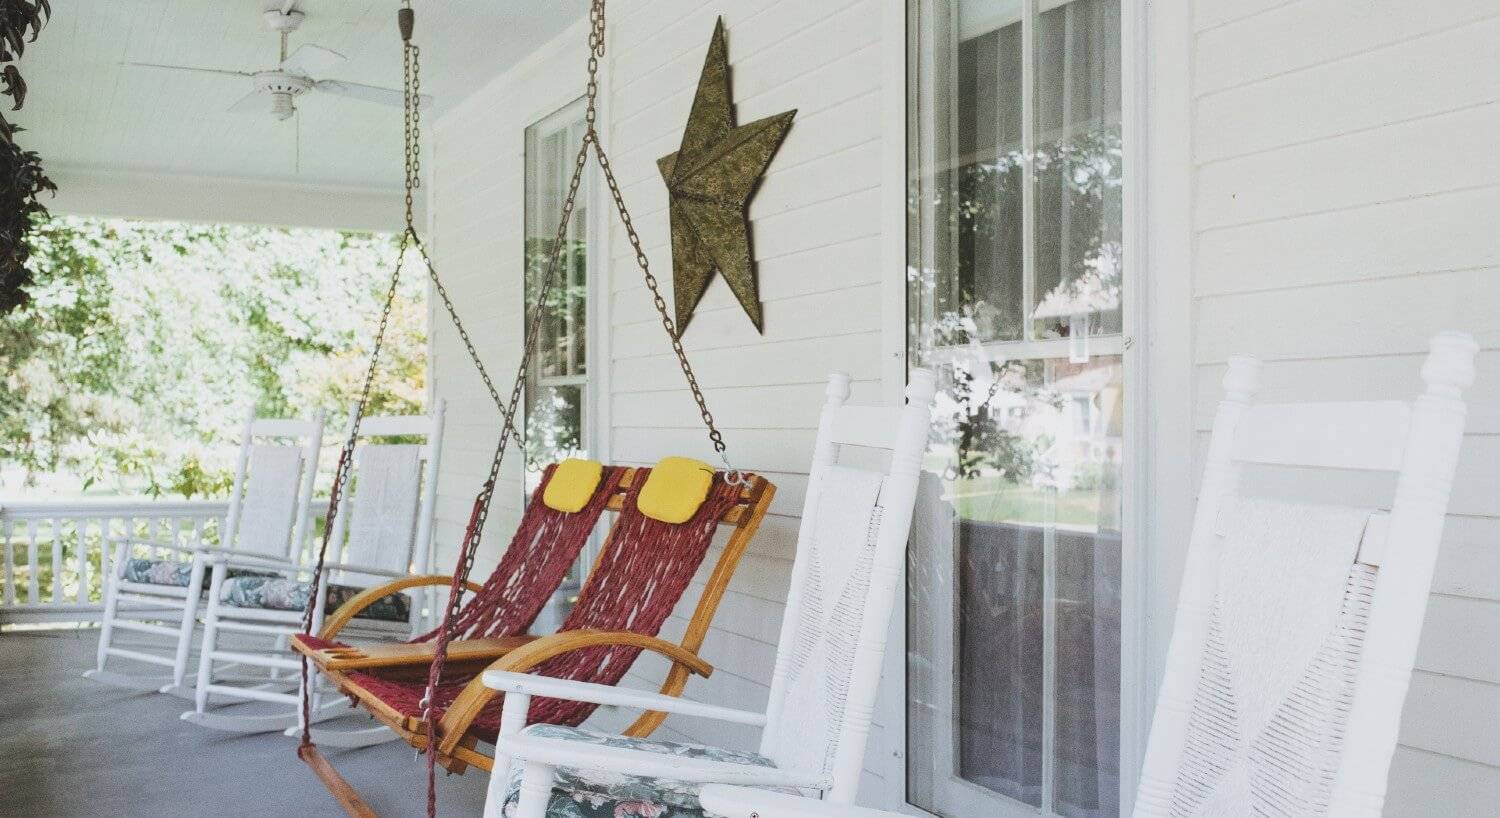 Outside porch with four white rocking chairs and hanging swing